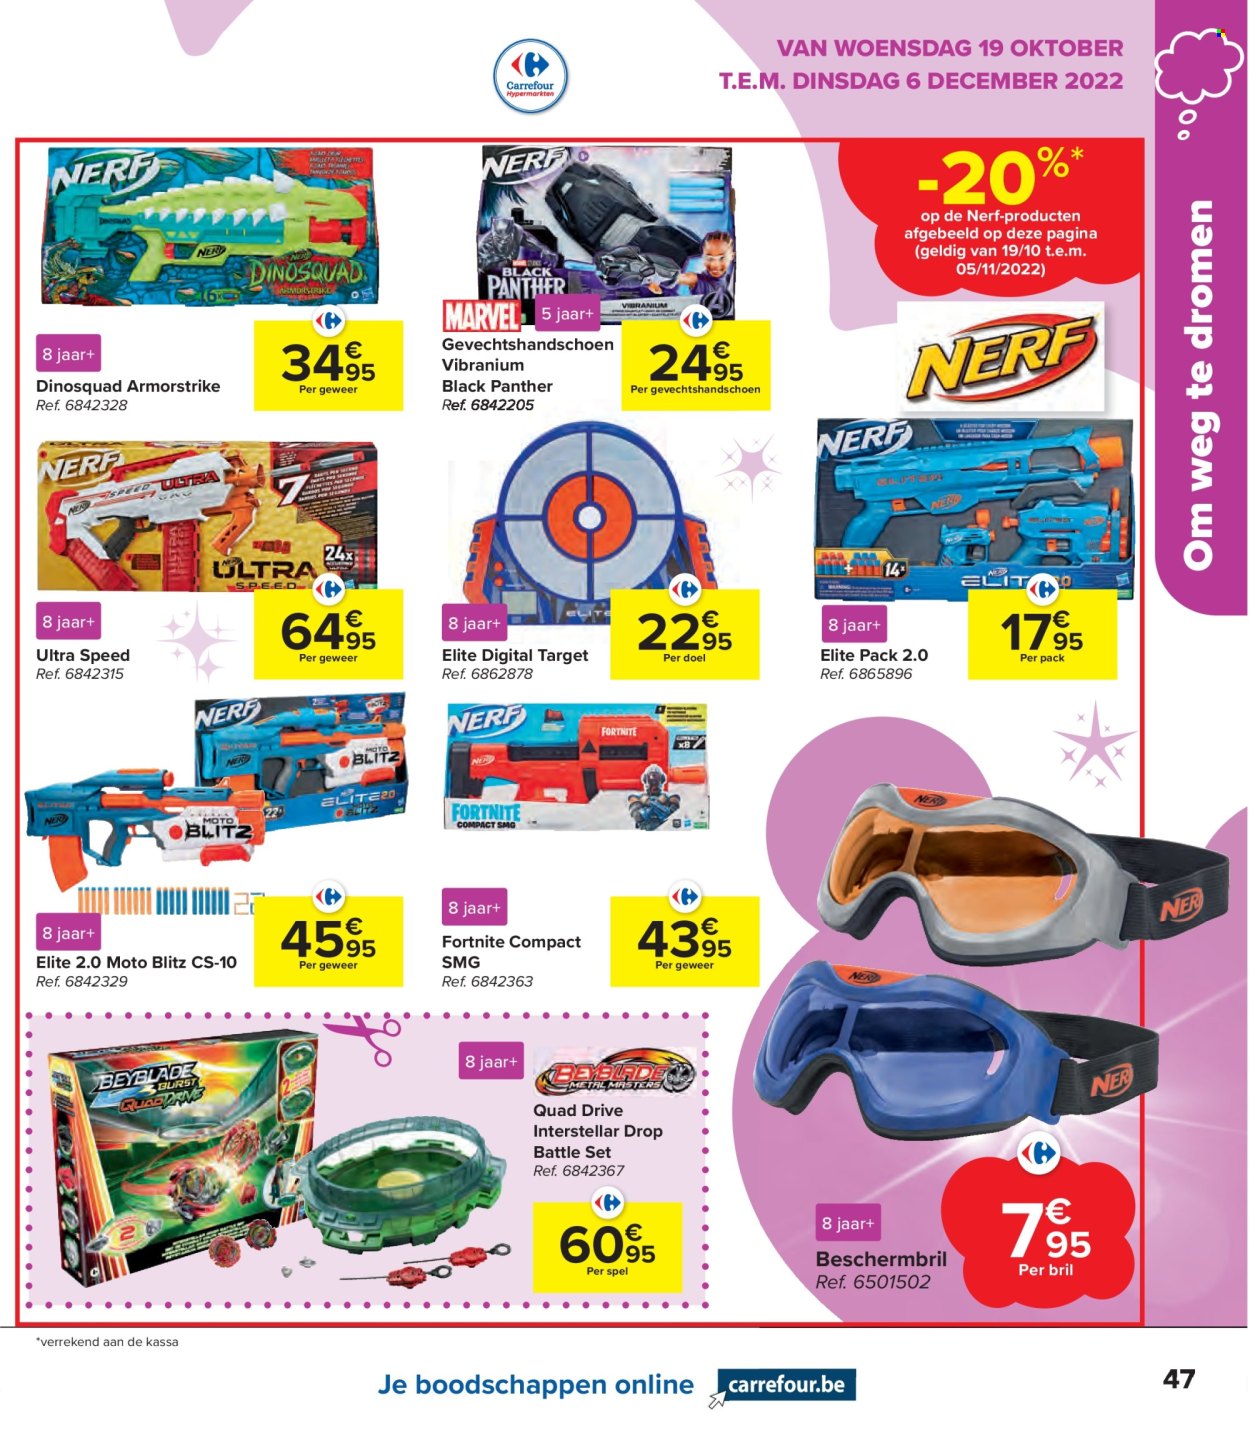 Catalogue Carrefour hypermarkt - 19.10.2022 - 6.12.2022. Page 47.